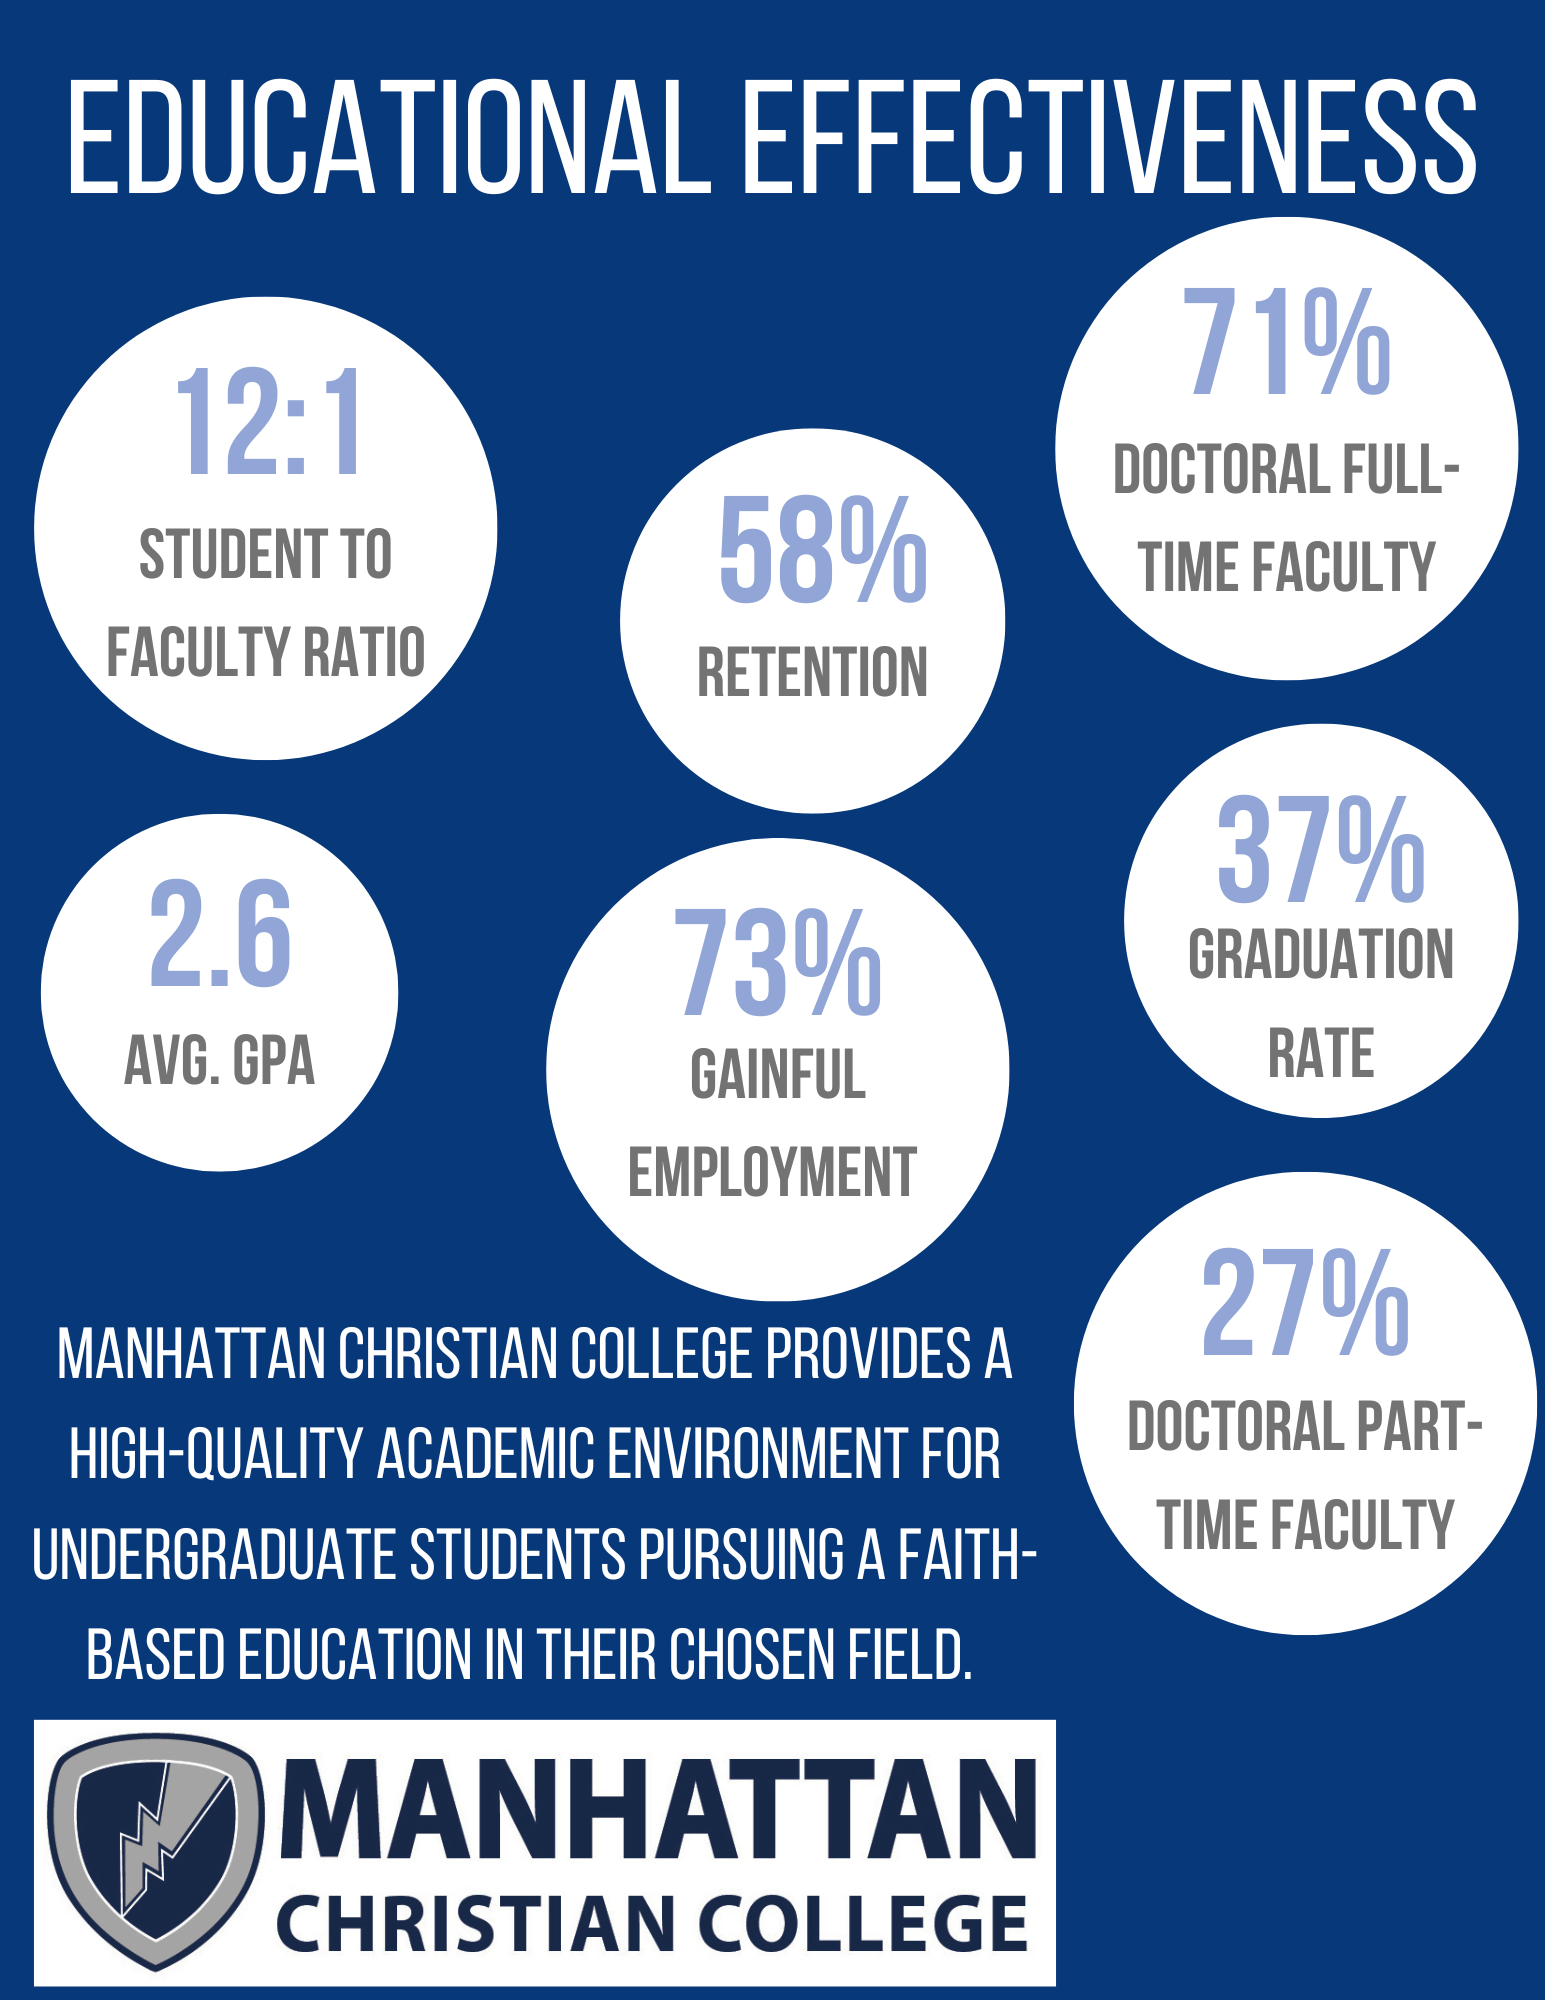 Infographic on MCC's Education Effectiveness, highlighting: 12 to 1 student to faculty ratio, 58 percent retention rate, 2.6 average GPA, 73 percent of recent students in gainful employment, 37 percent graduation rate, 71 percent doctoral full-time faculty, and 27 percent doctoral part-time faculty. "Manhattan Christian College provides a high-quality academic environment for undergraduate sutdents pursuing a faith-based education in their chosen field."